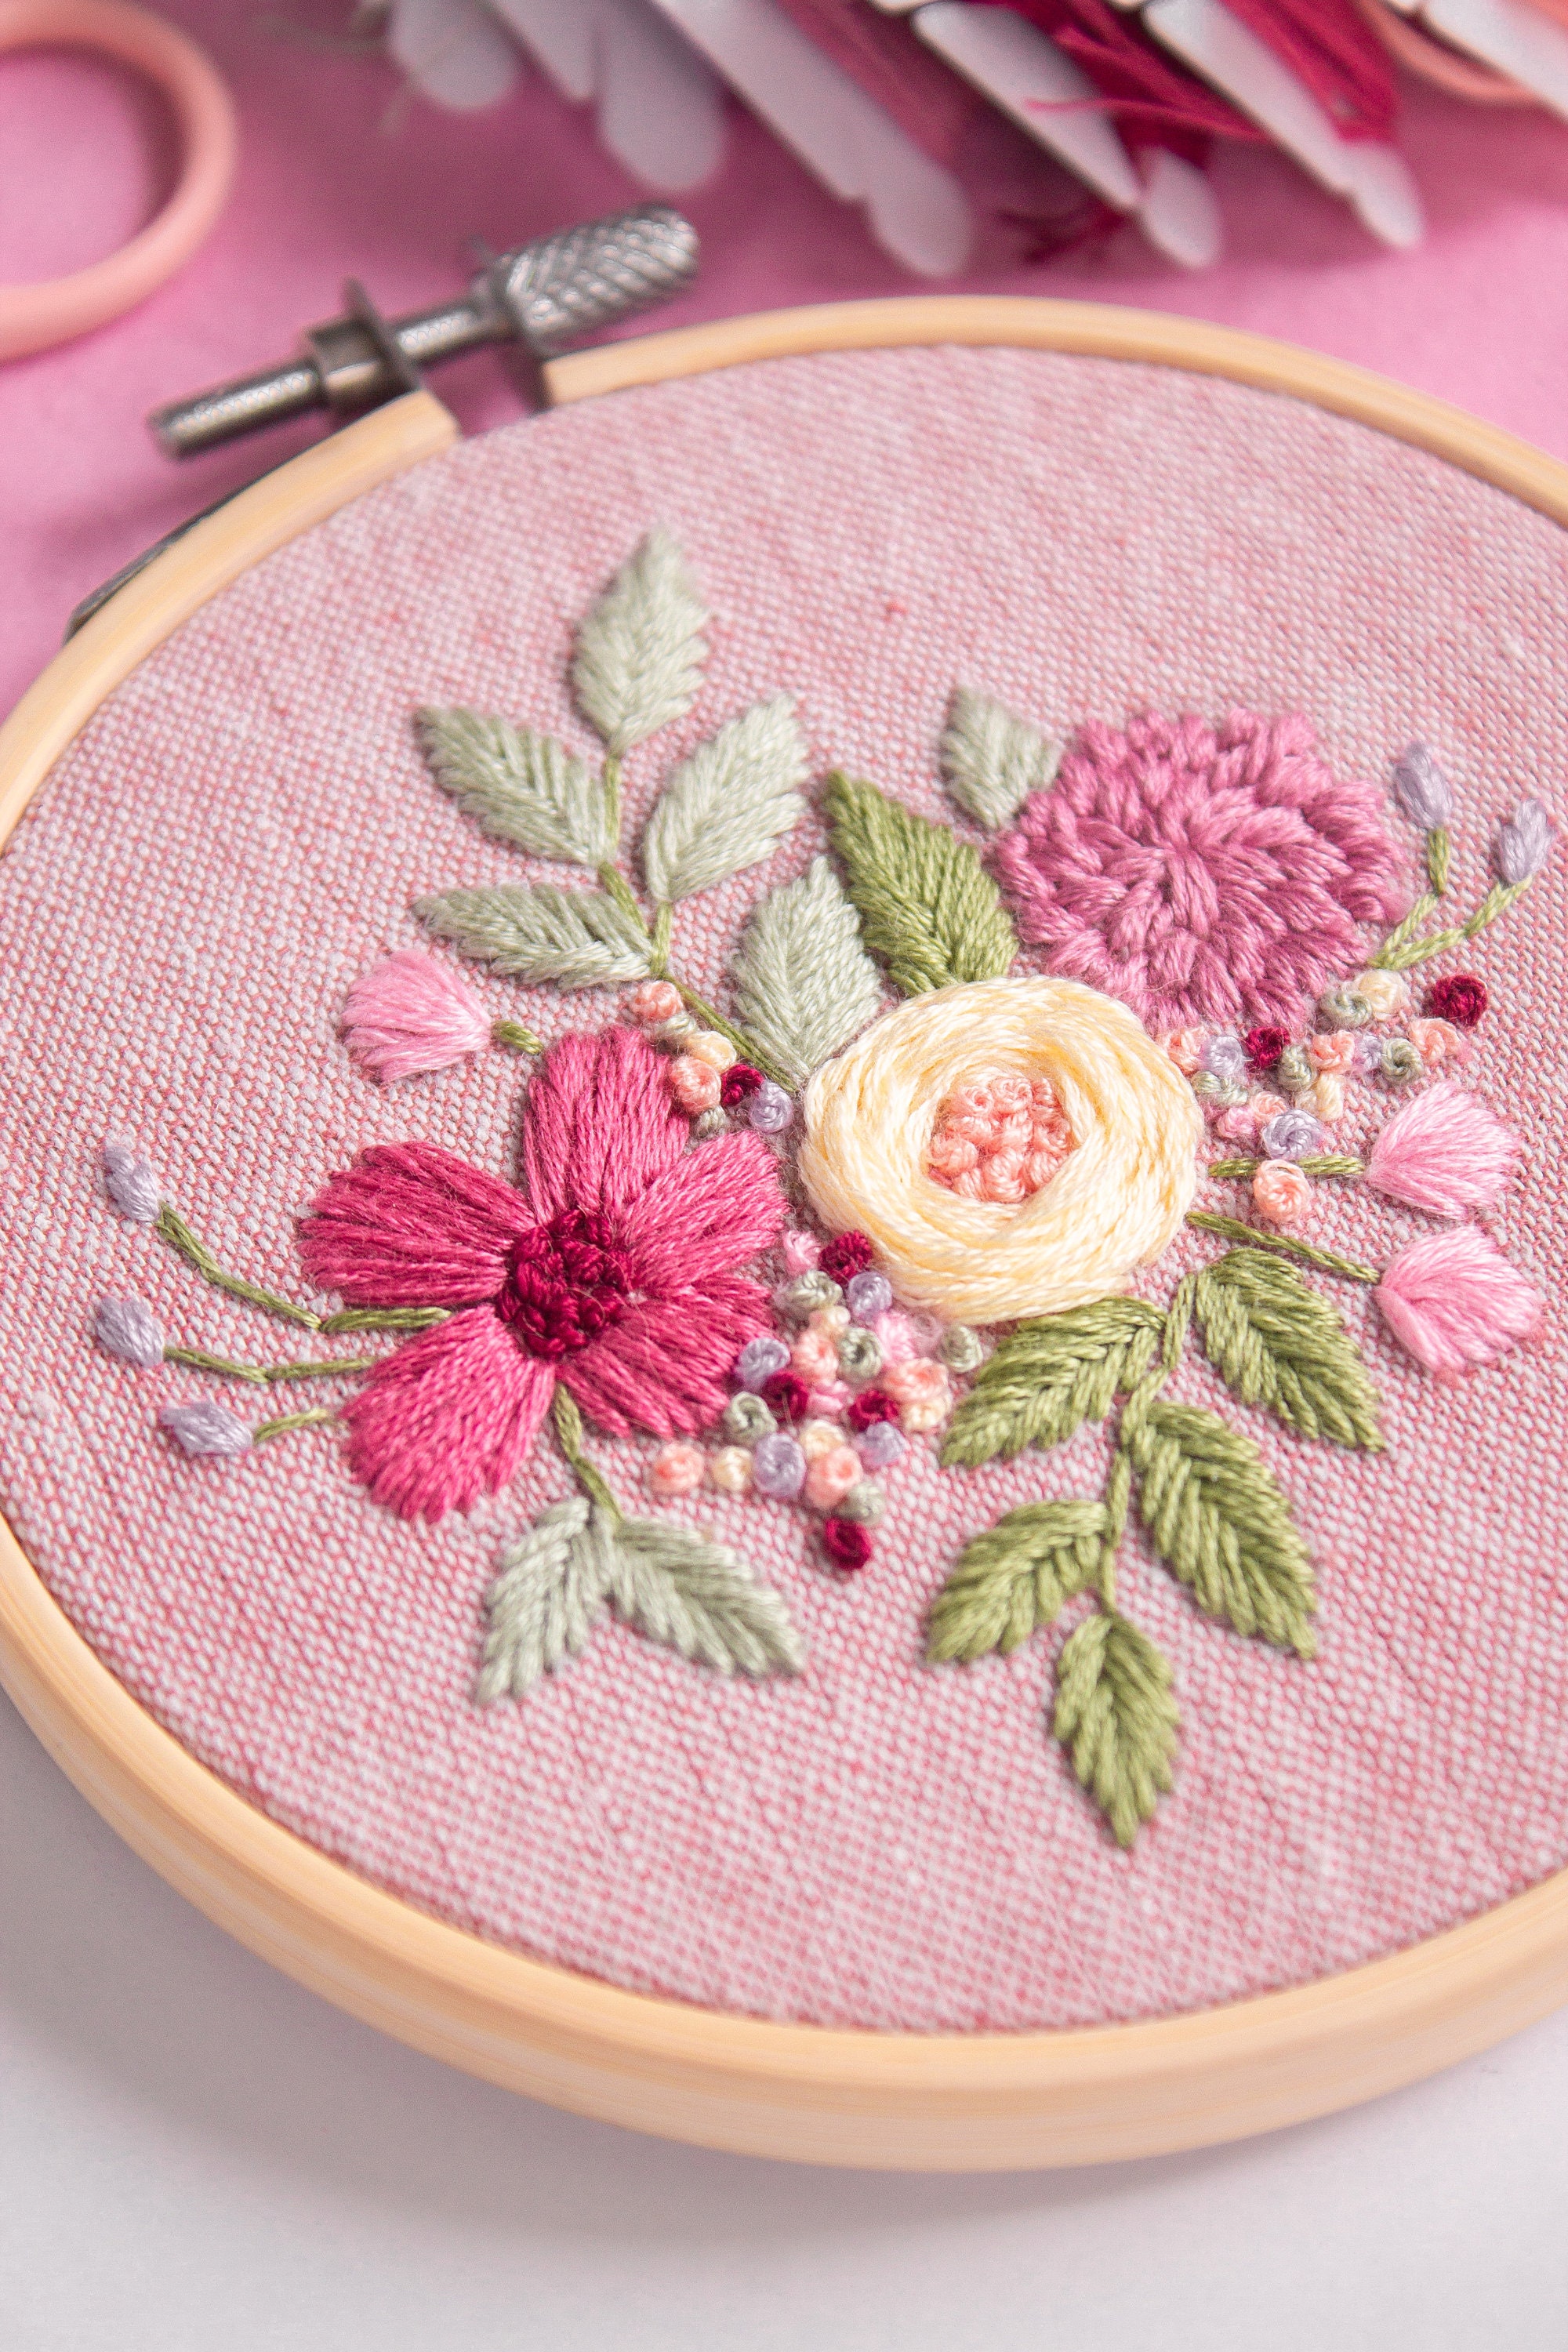 Roses Vintage Embroidery Classical Embroidery Vintage Buds Of